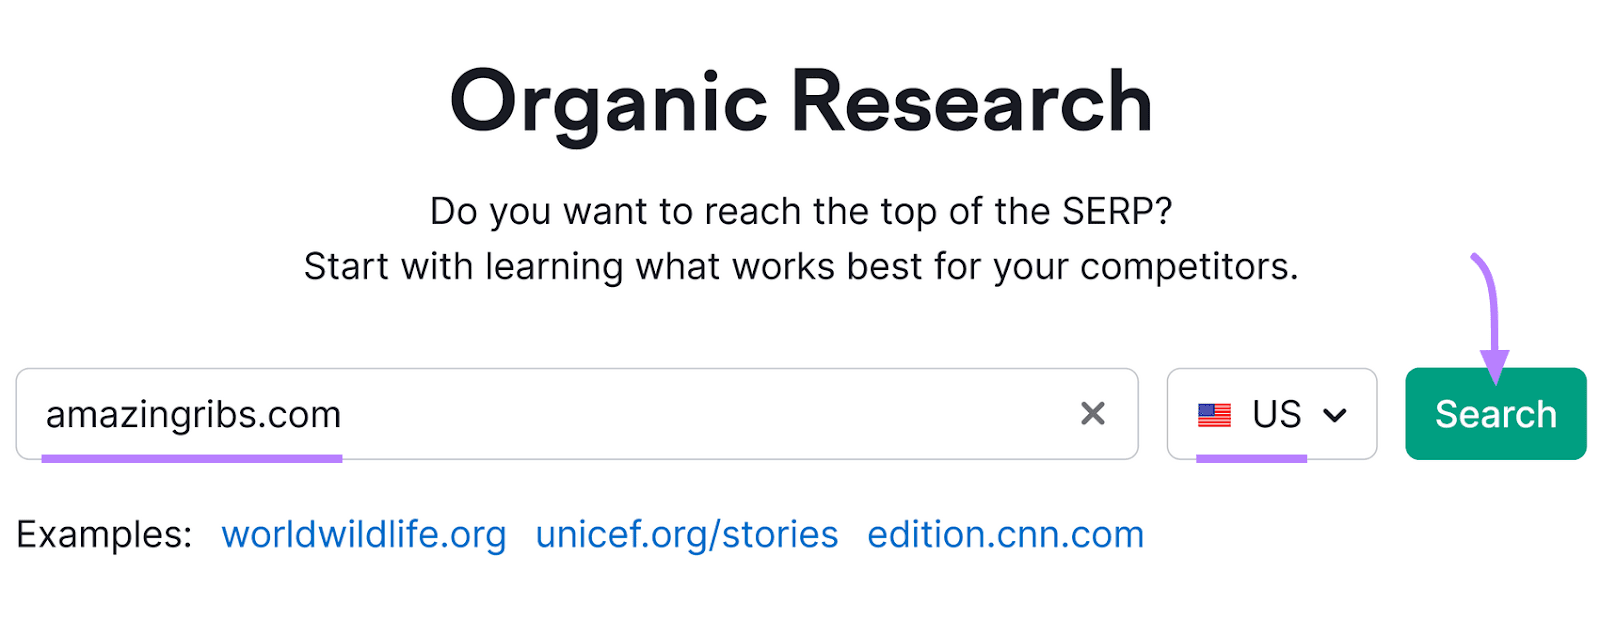 Organic Research tool with a search bar pre-filled with "amazingribs.com" and a green "Search" button with an arrow above it.